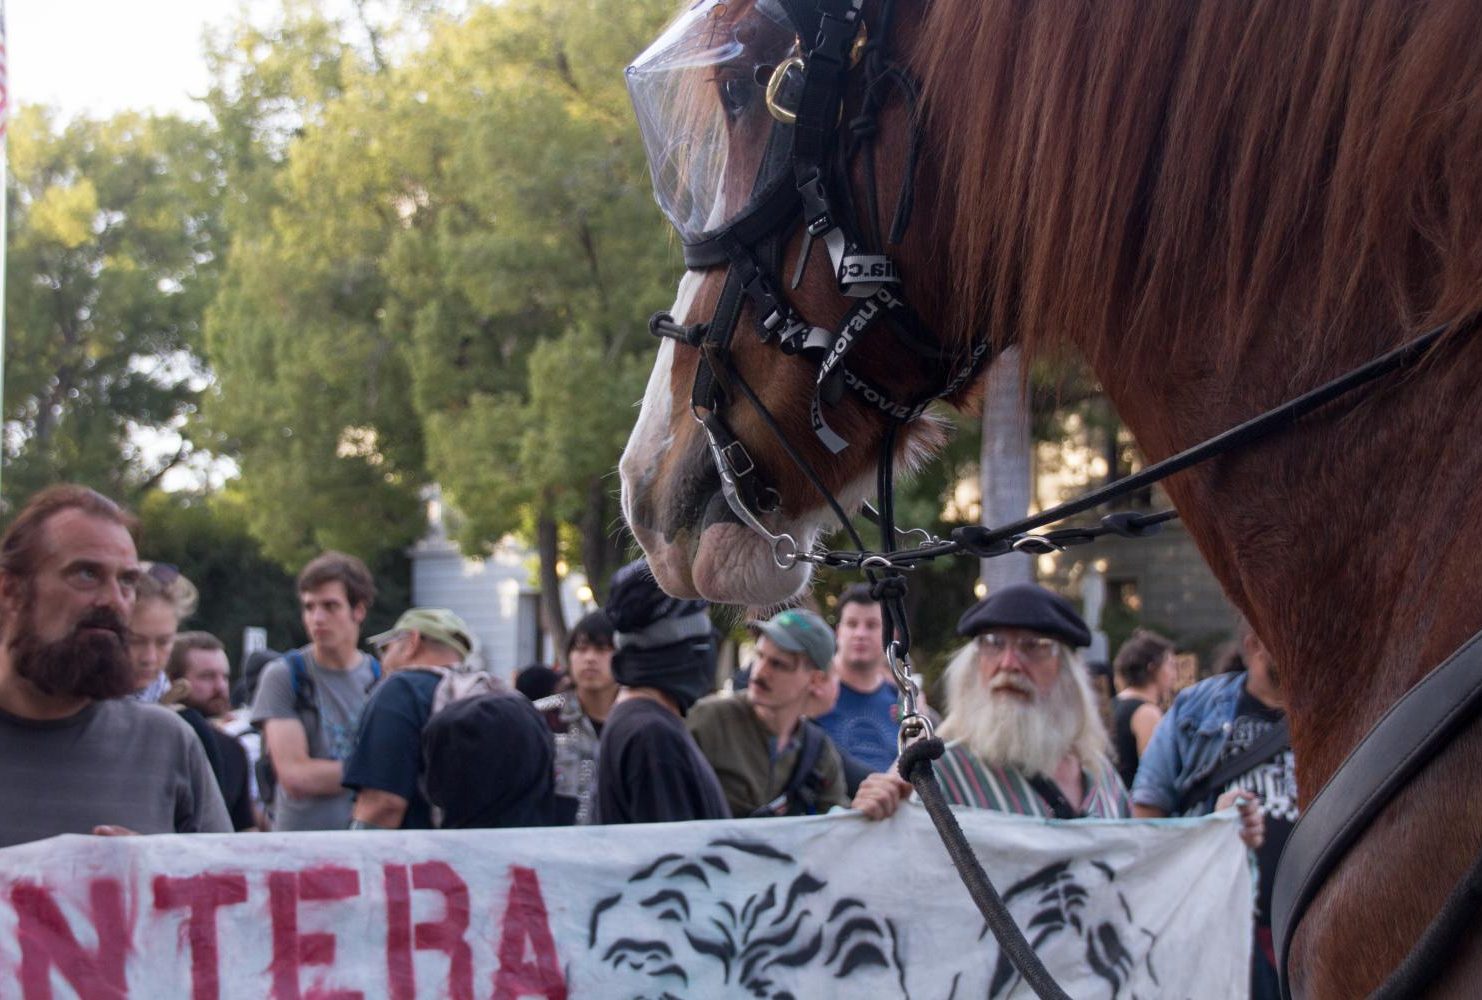 During a “Turn California Red” conservative rally at the Sacramento Capital, mounted police horses wear eye protection while pushing back counter-protestors on Nov. 4, 2018. (Photo by Patrick Hyun Wilson)